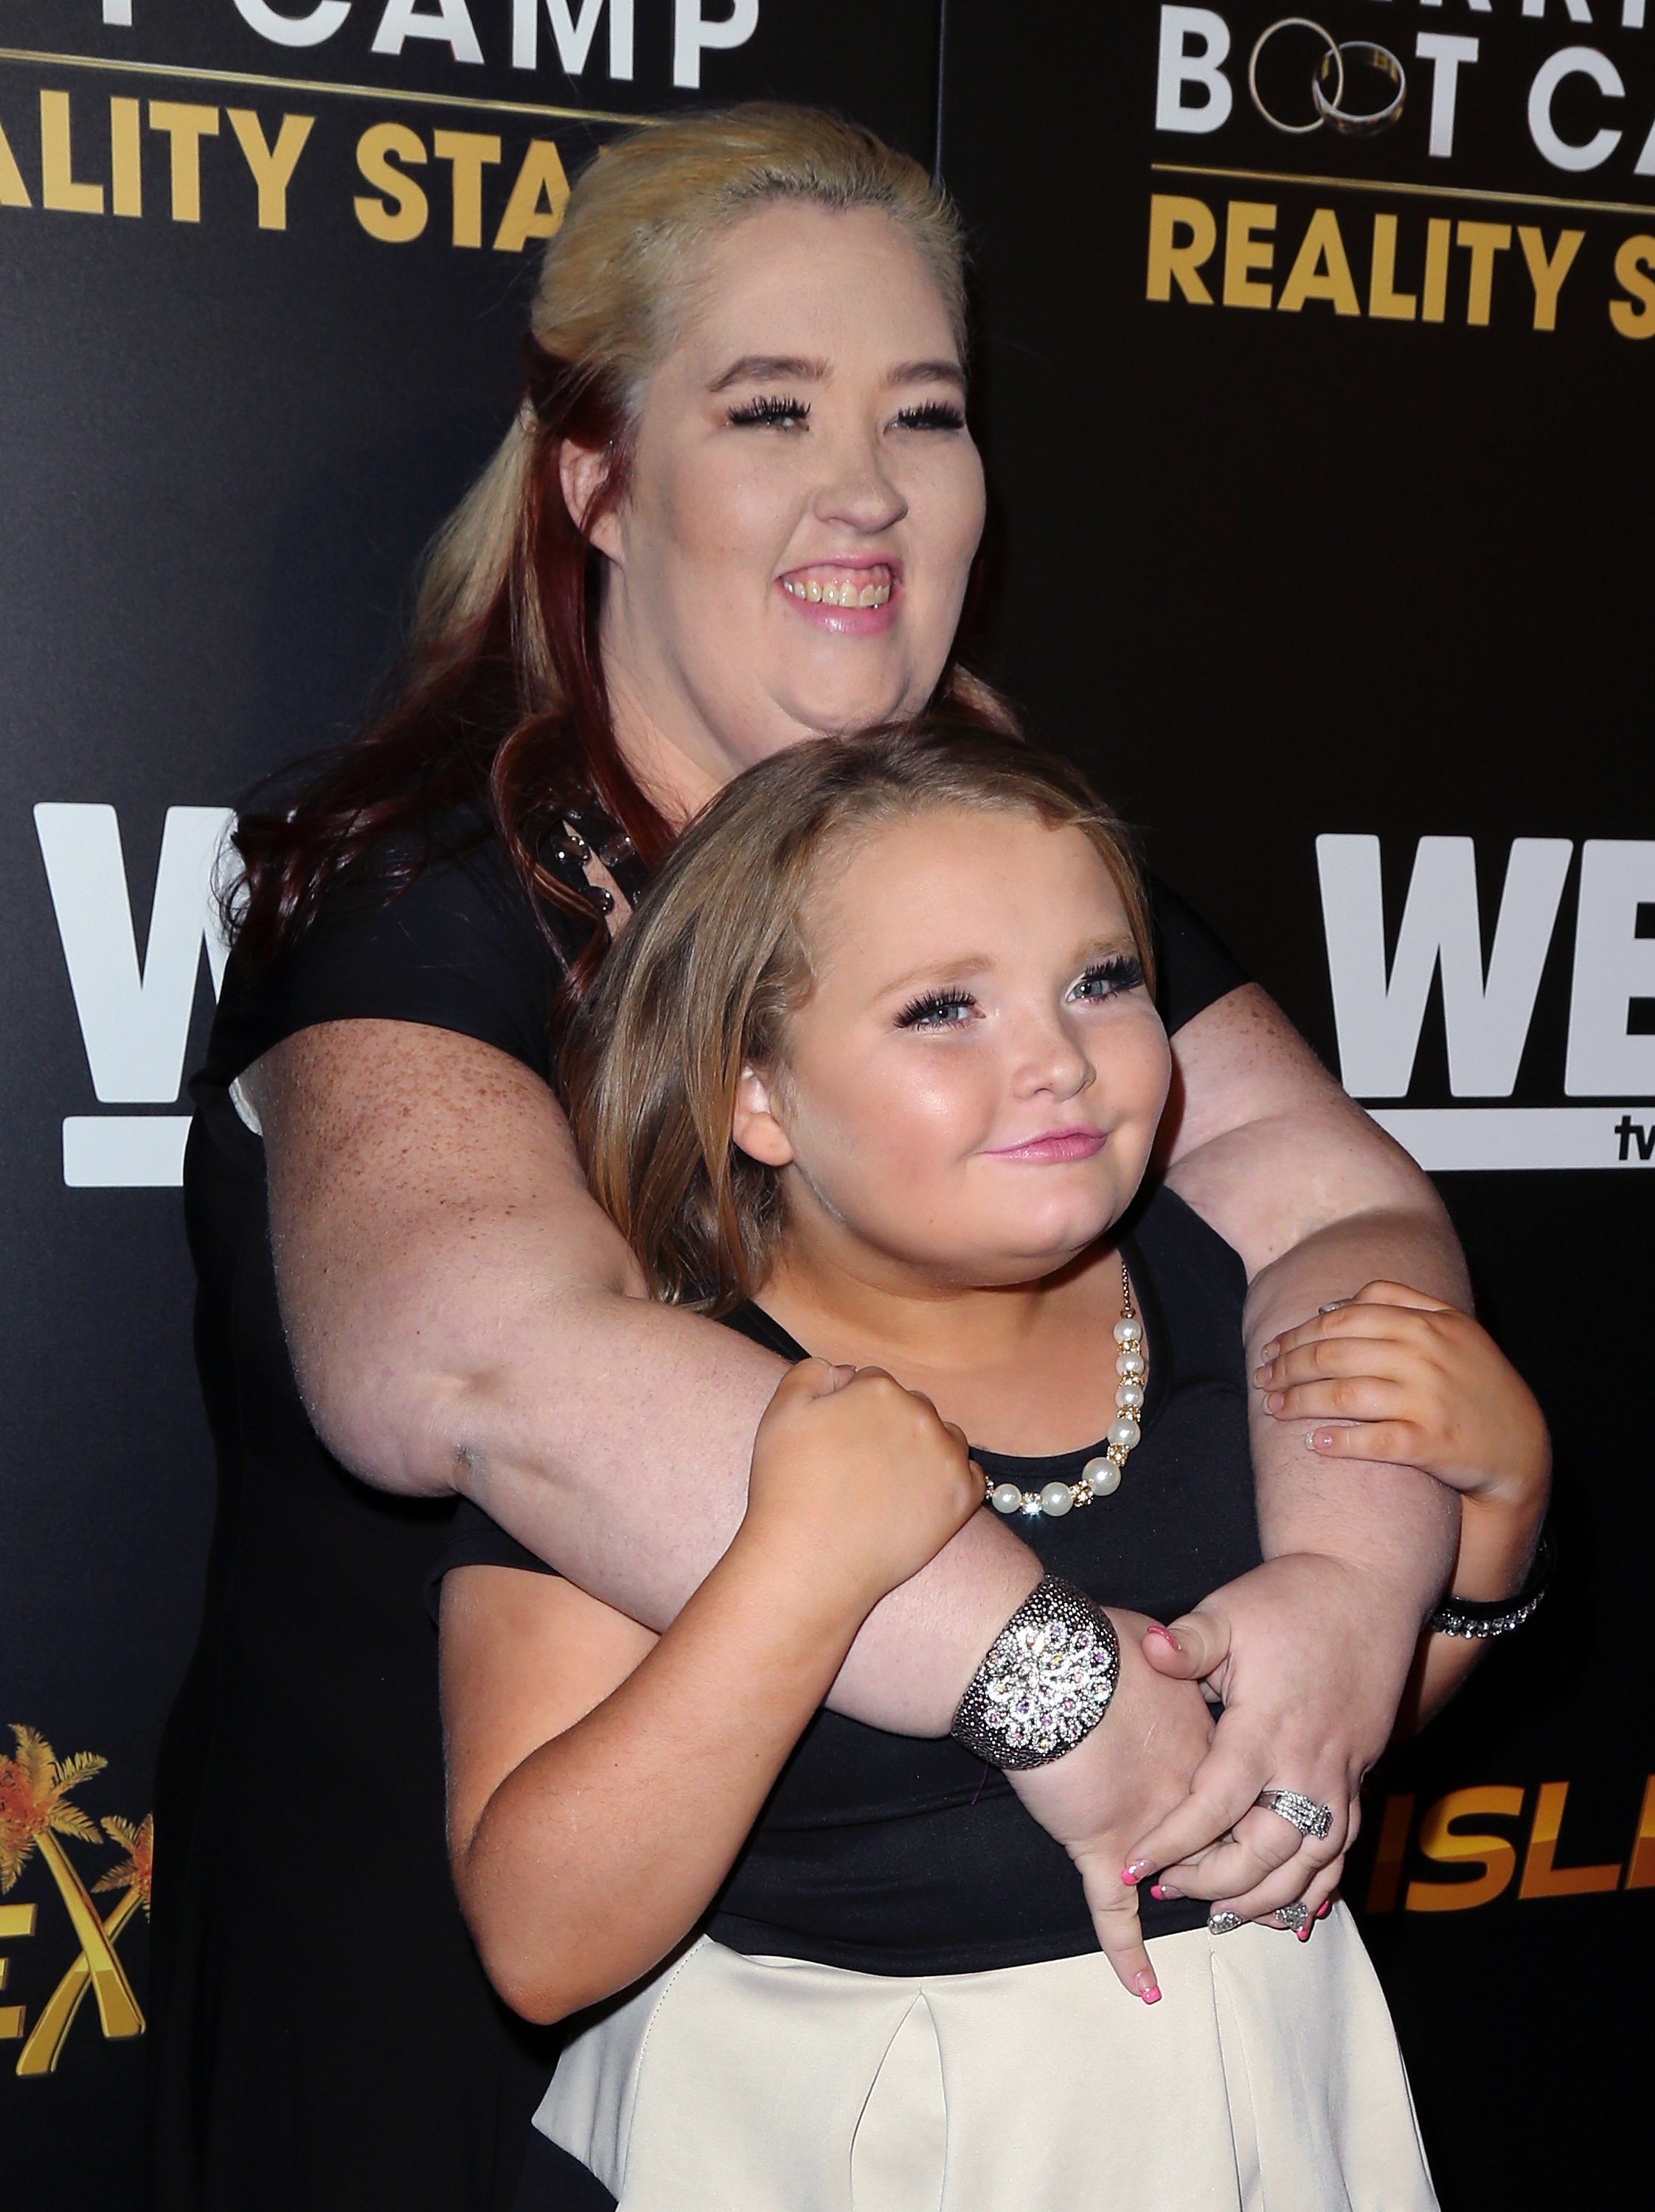 June Shannon and daughter Alana Thompson attend the premiere celebration for "Marriage Boot Camp Reality Stars" and "Ex-isled" in Hollywood, California in November 2015 | Photo: Getty Images